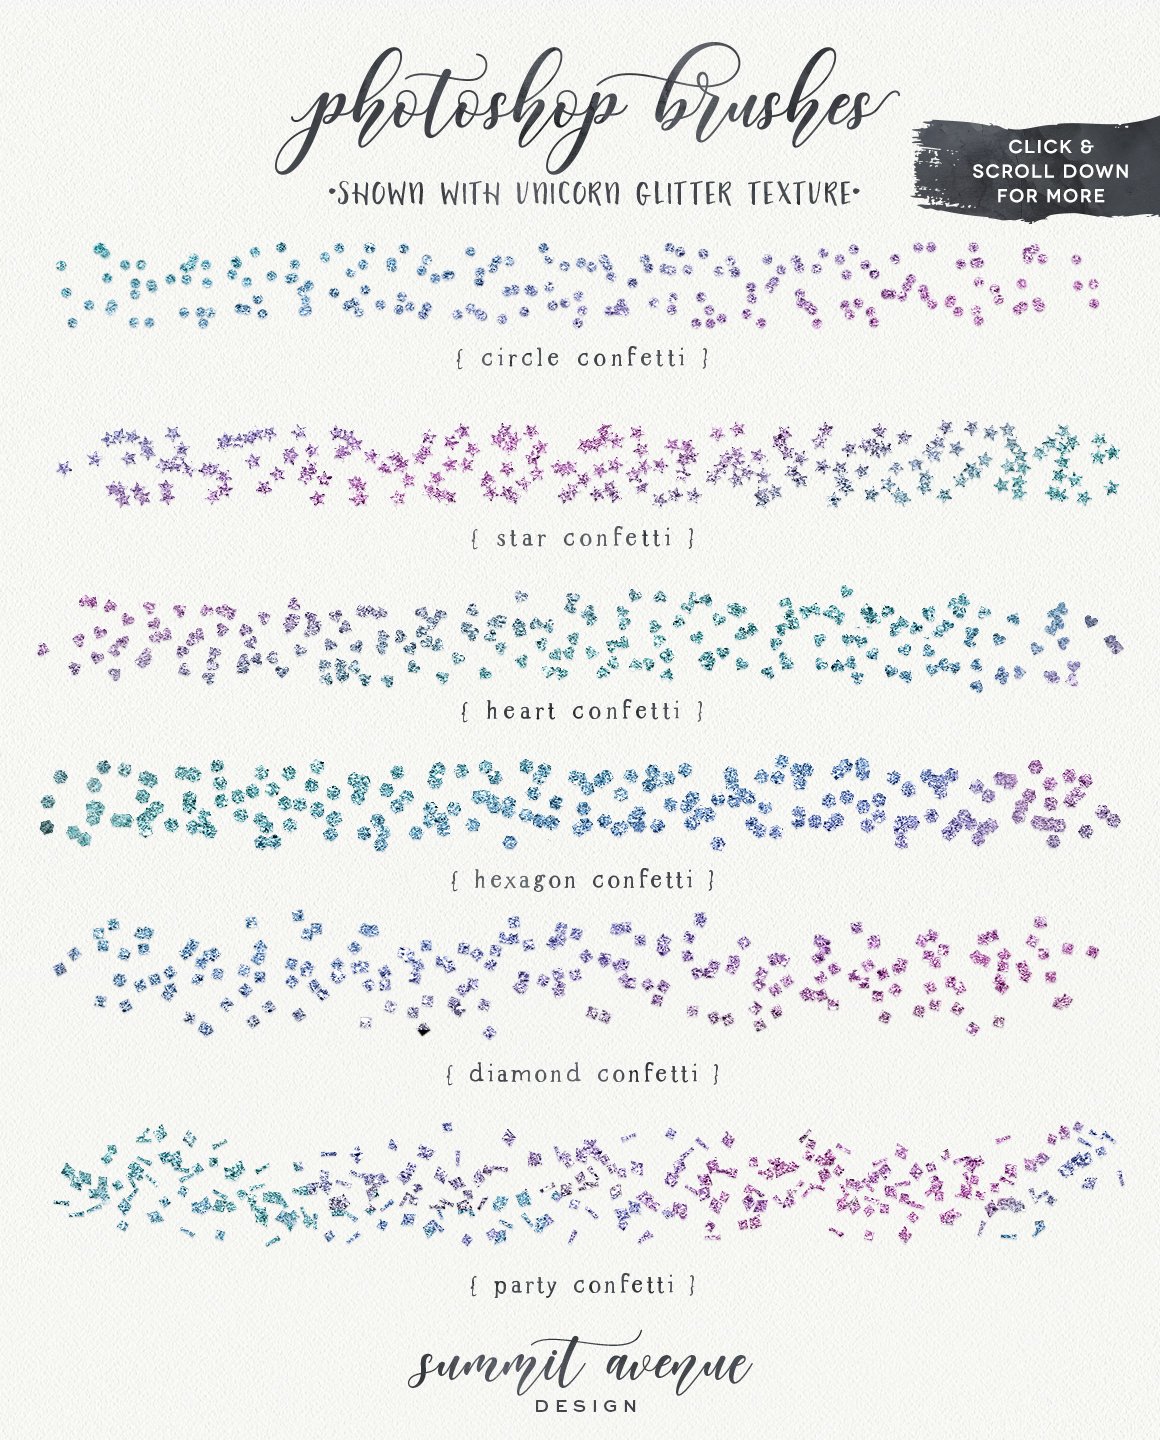 Confetti Brushes & Foil Texturespreview image.